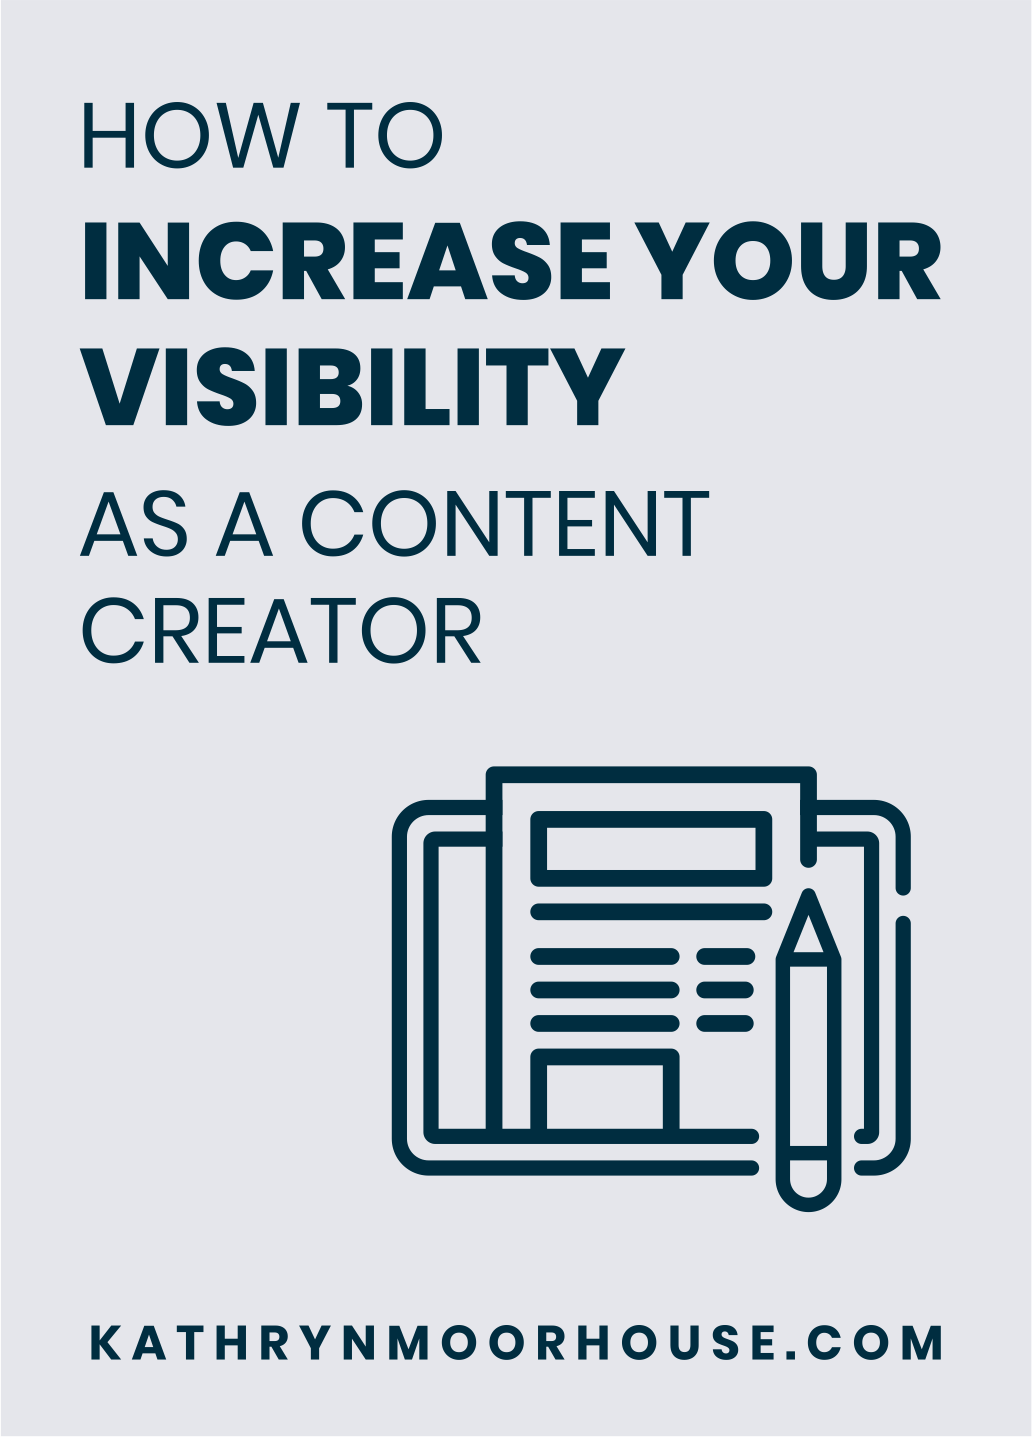 HOW TO INCREASE YOUR VISIBILITY AS A CONTENT CREATOR